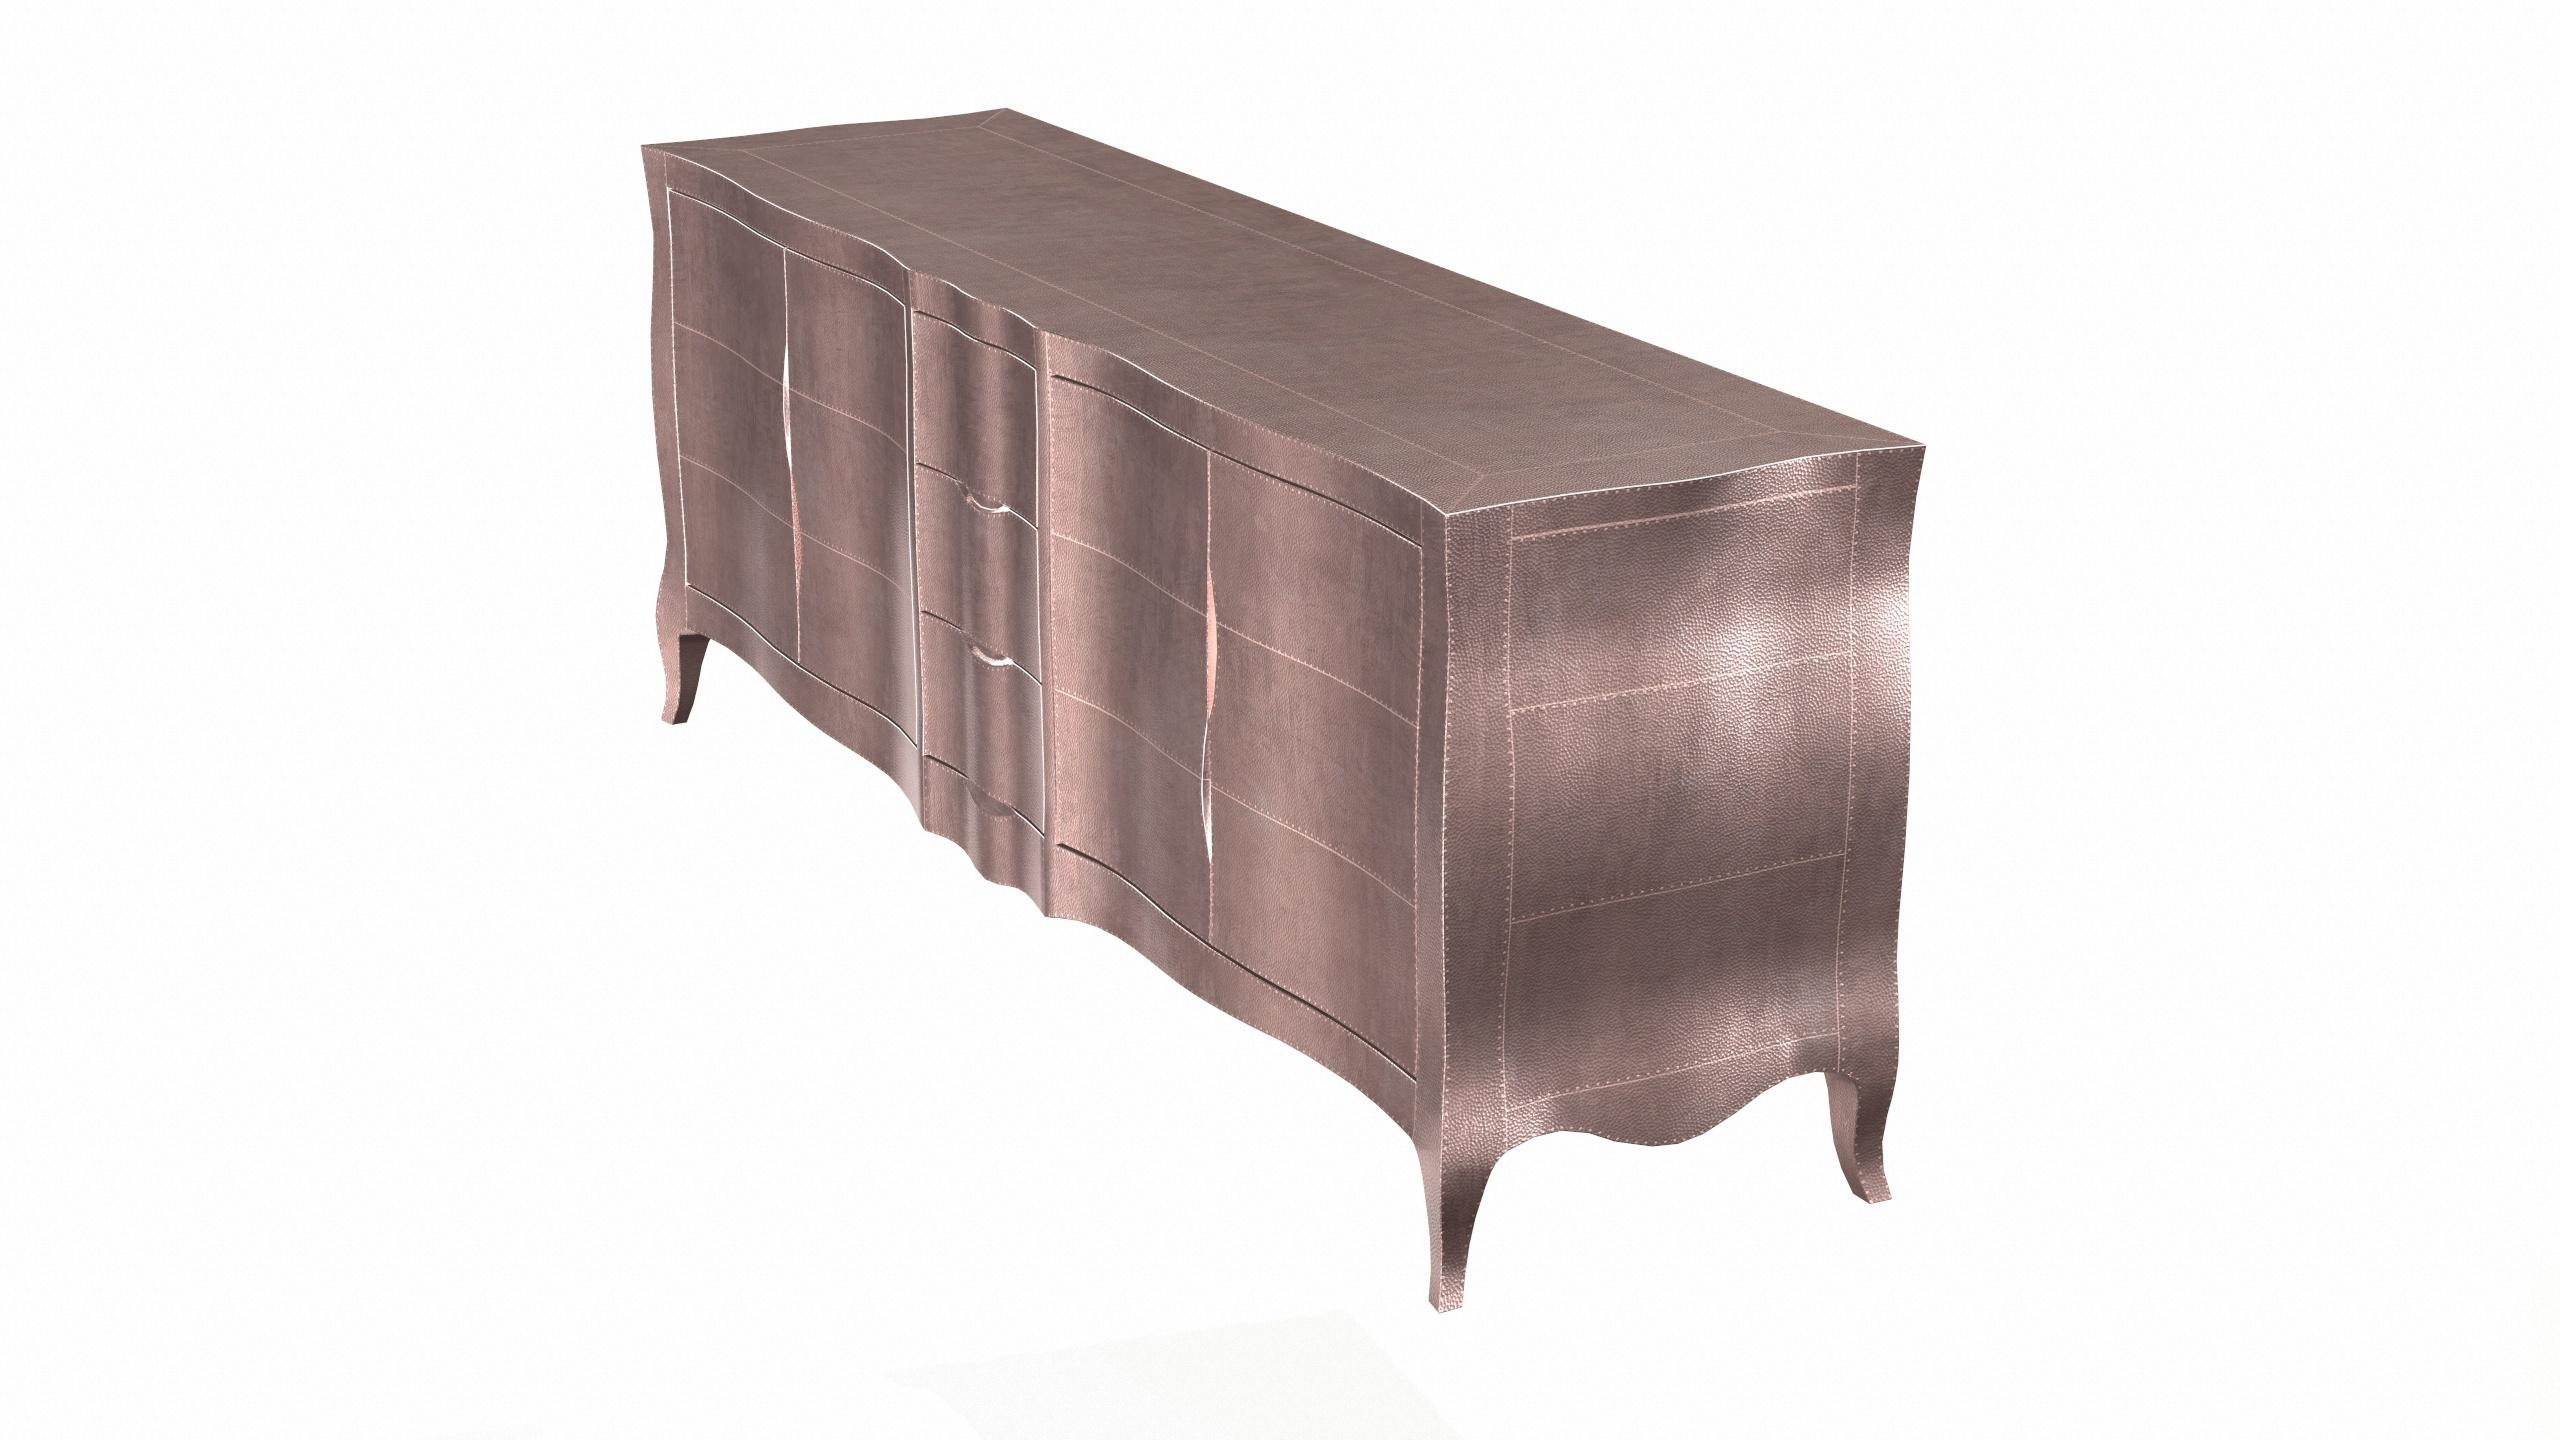 Hand-Carved Louise Credenza Art Deco Bookcases in Mid. Hammered Copper by Paul Mathieu For Sale